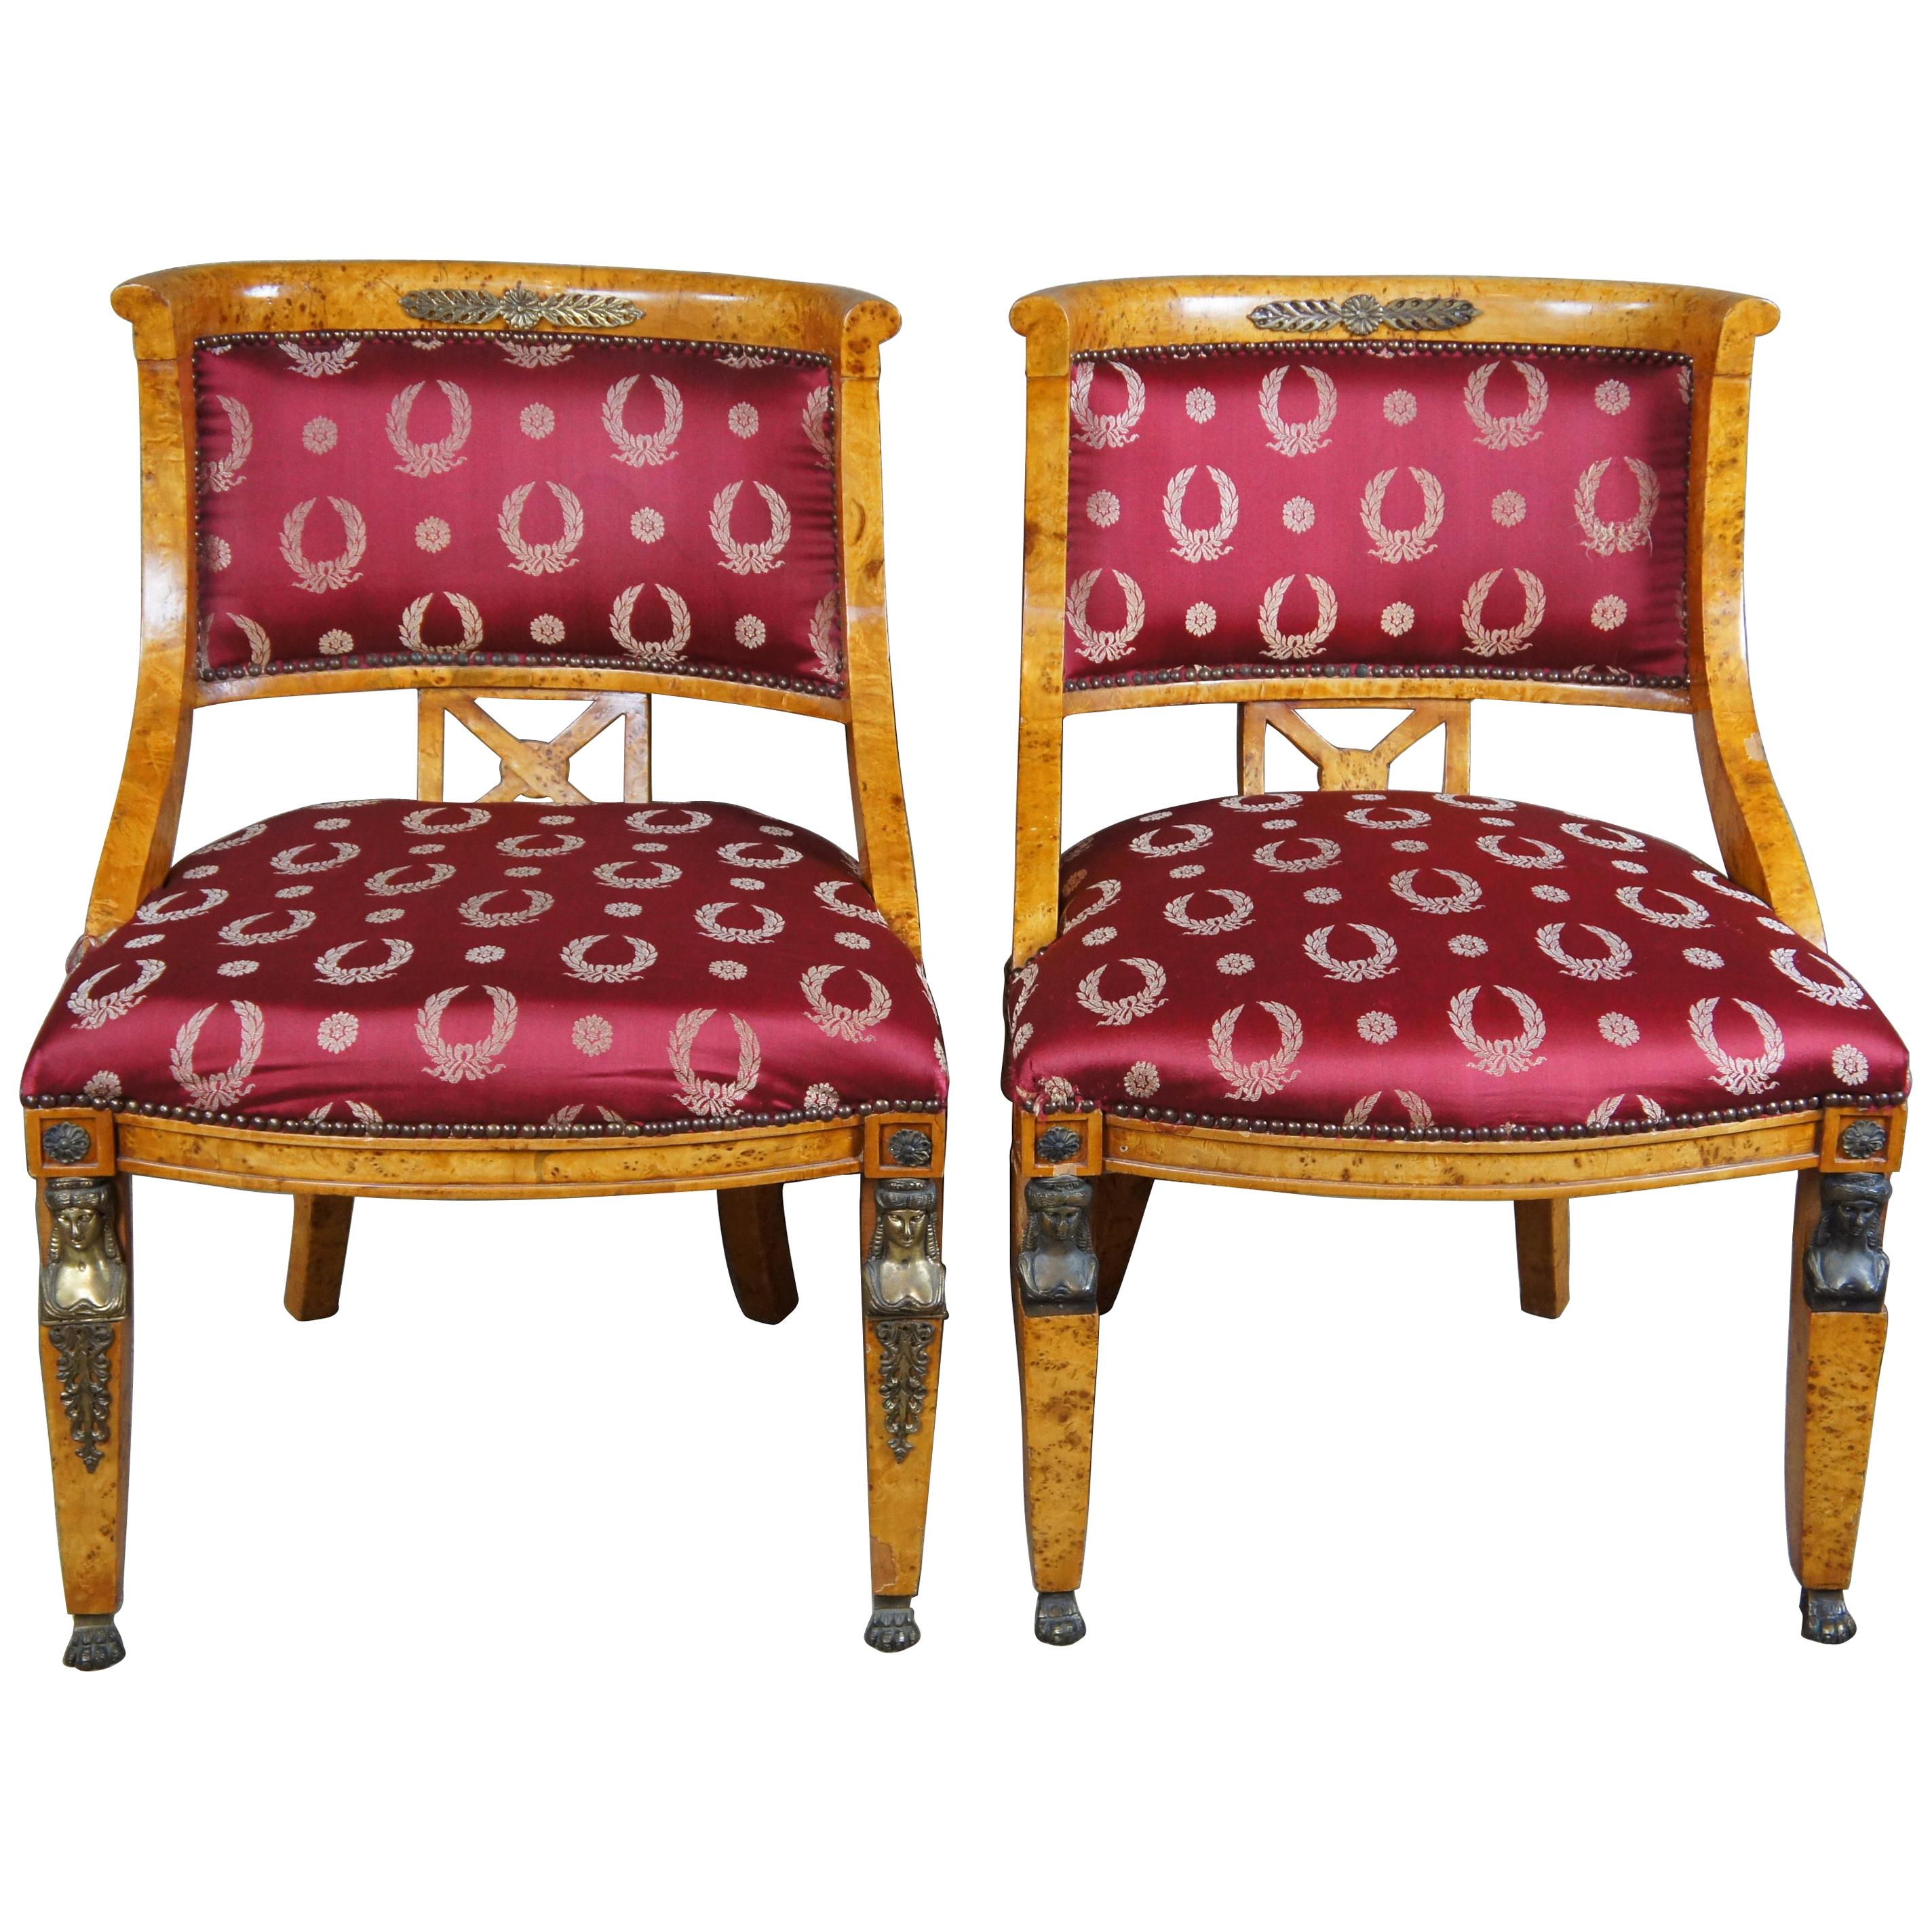 2 Antique Egyptian Revival Olive Burlwood Parlor Chairs Neoclassical For Sale